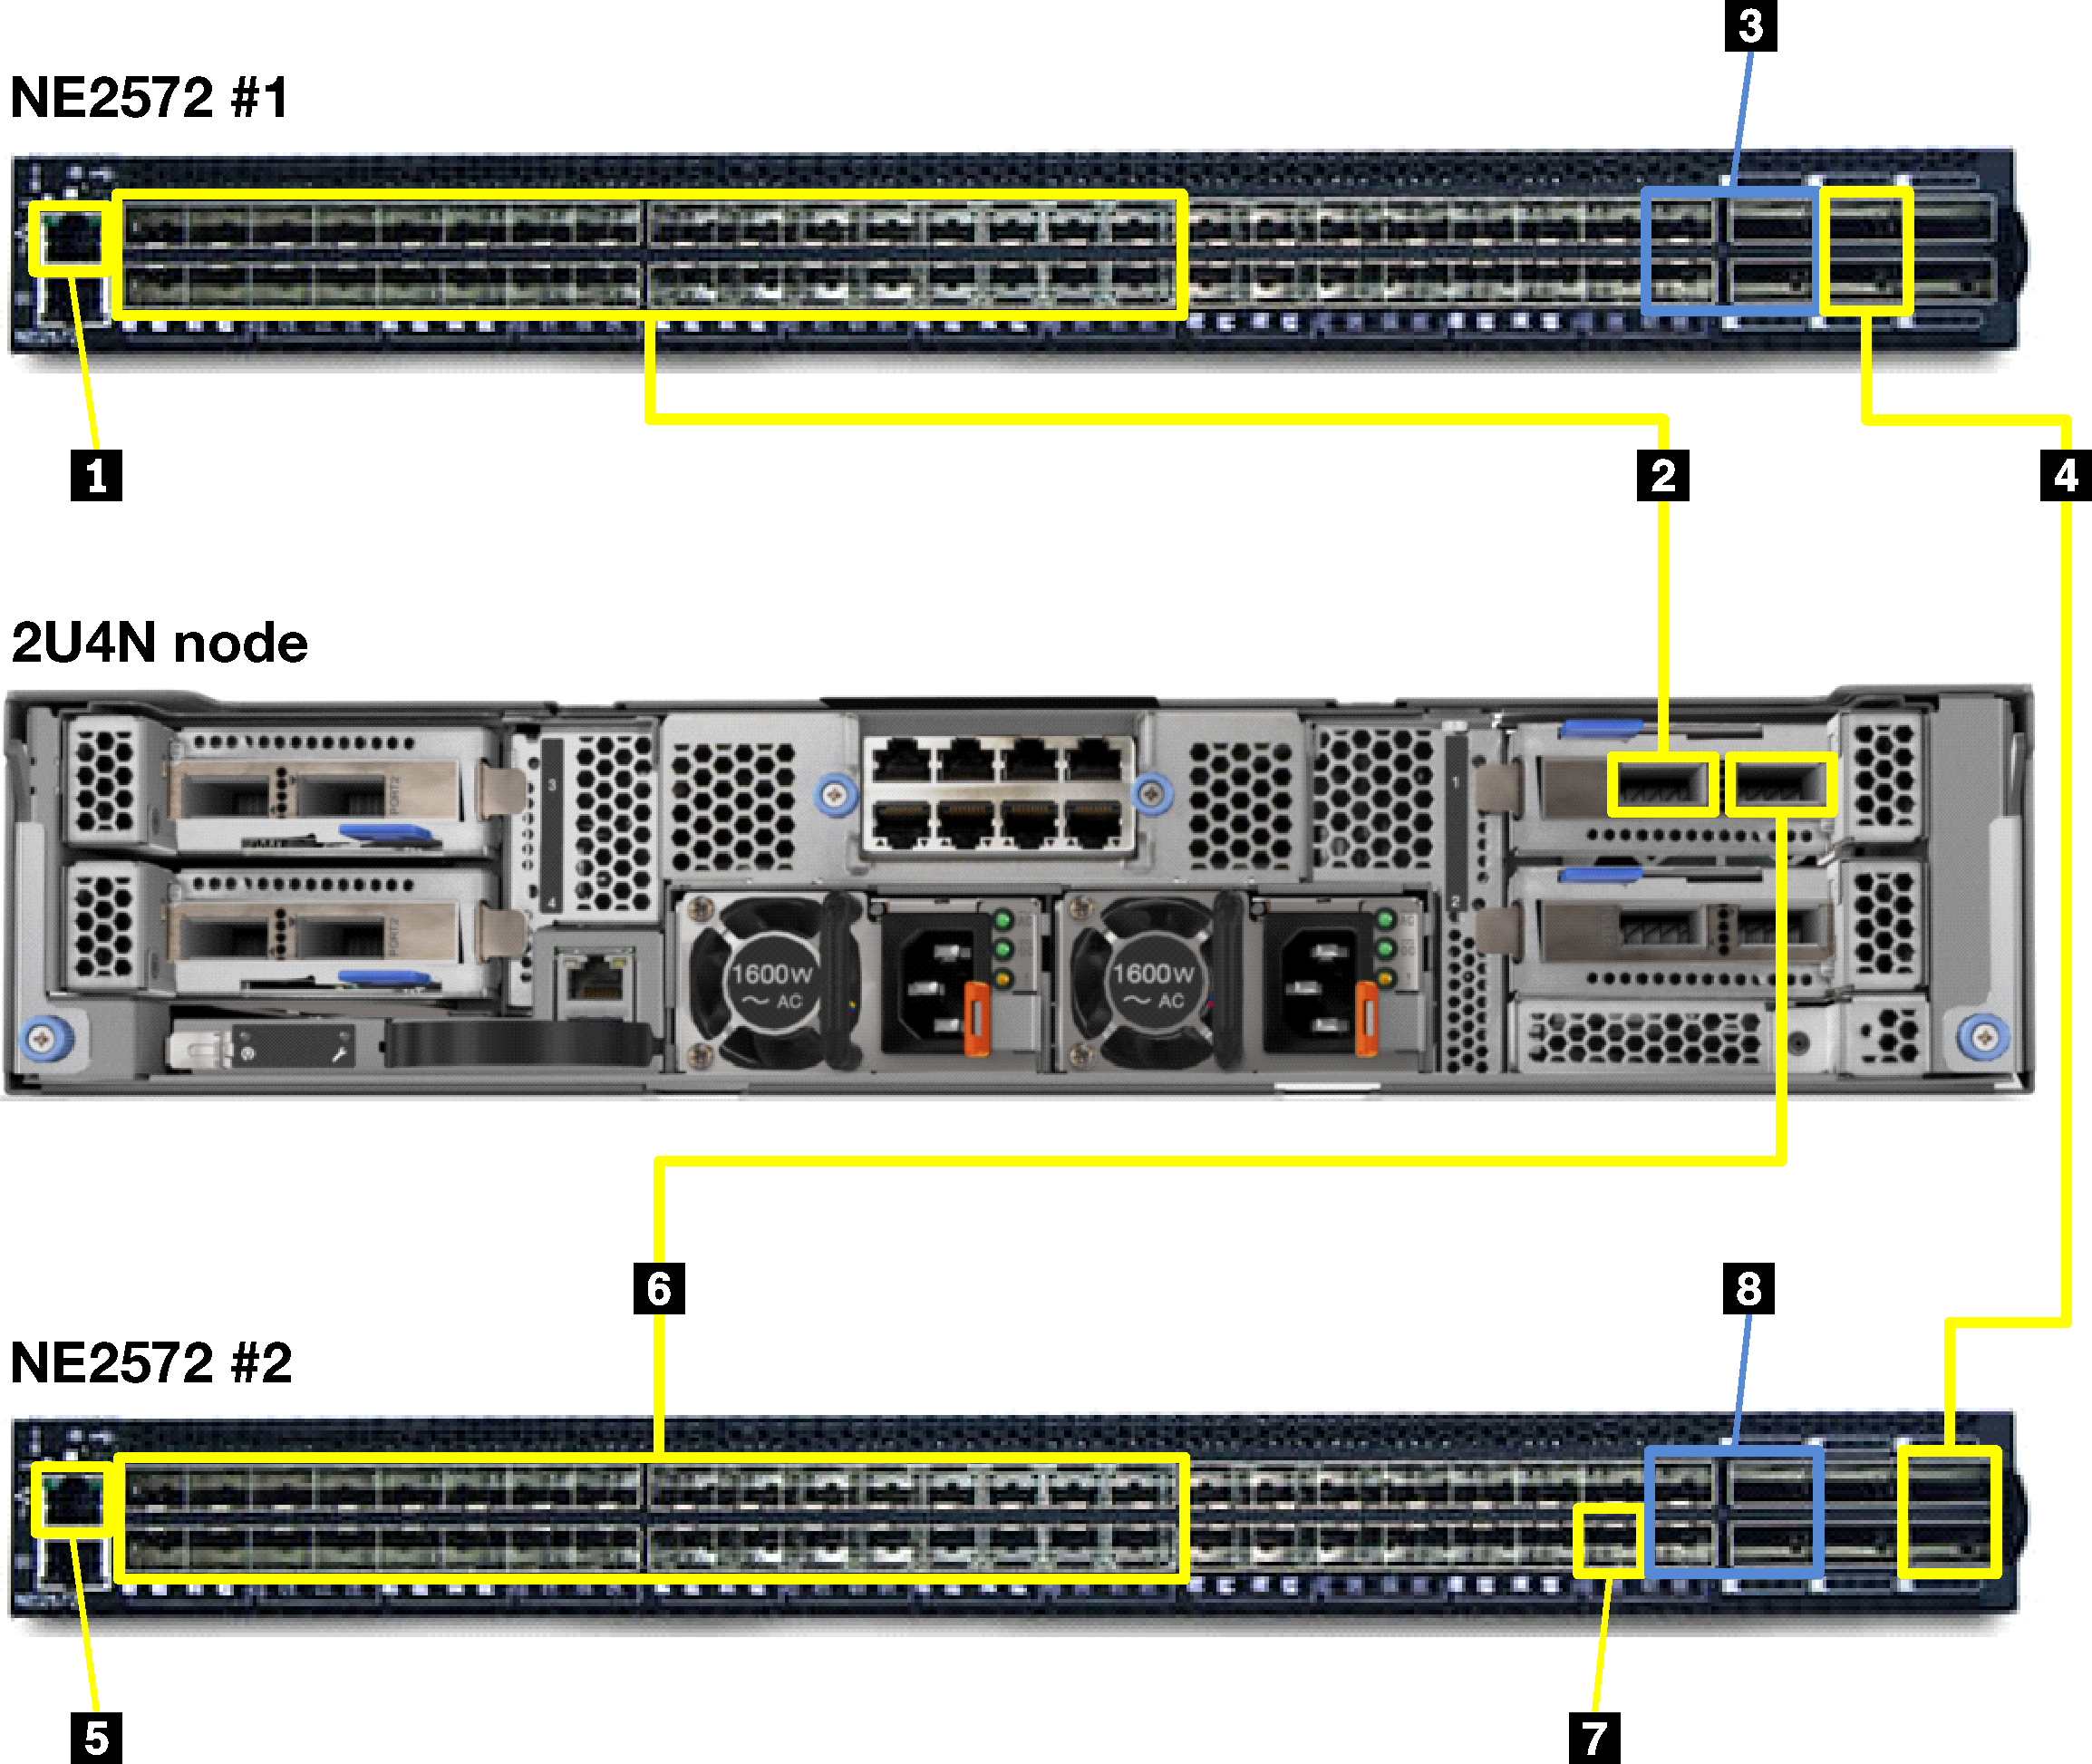 Graphic showing ThinkSystem NE2572 cabling for 2U4N enclosures.